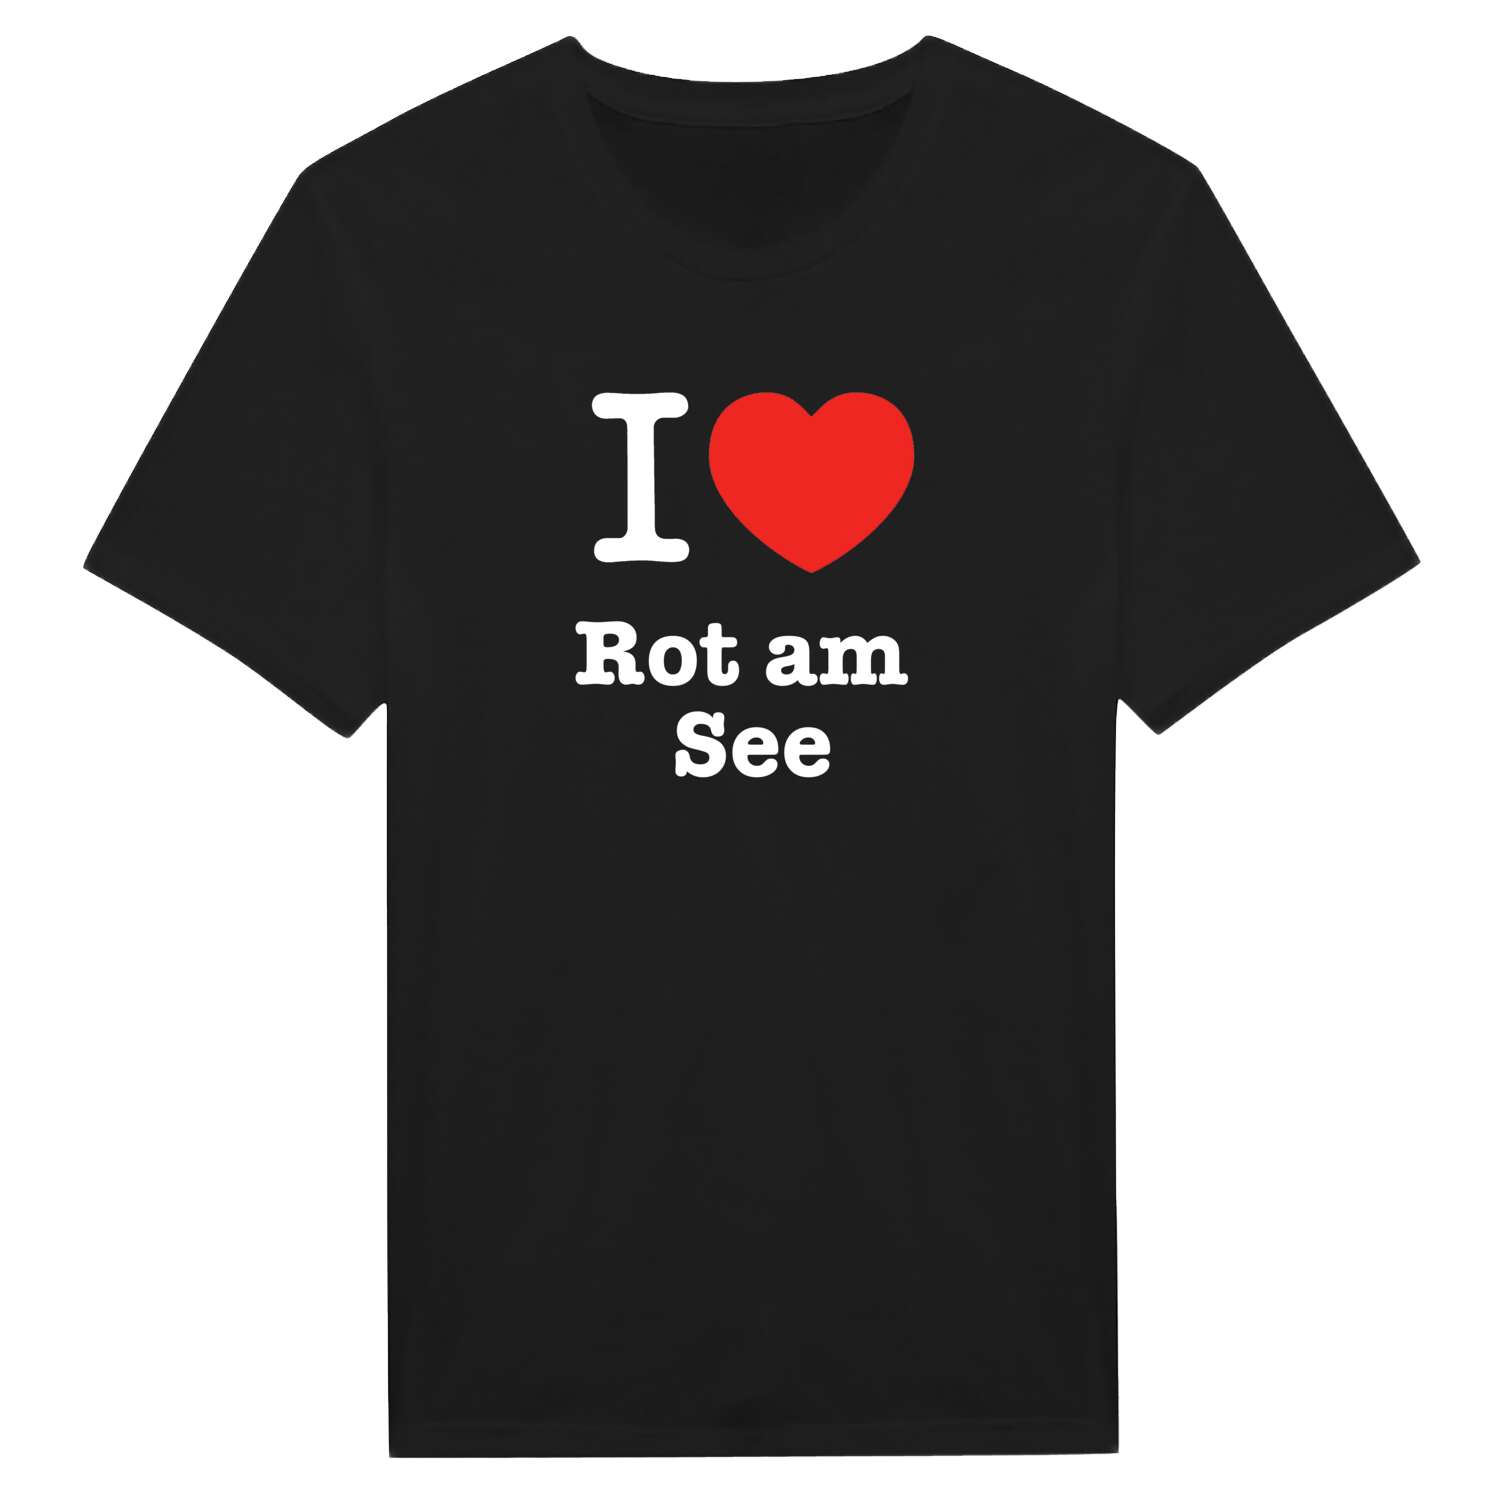 Rot am See T-Shirt »I love«